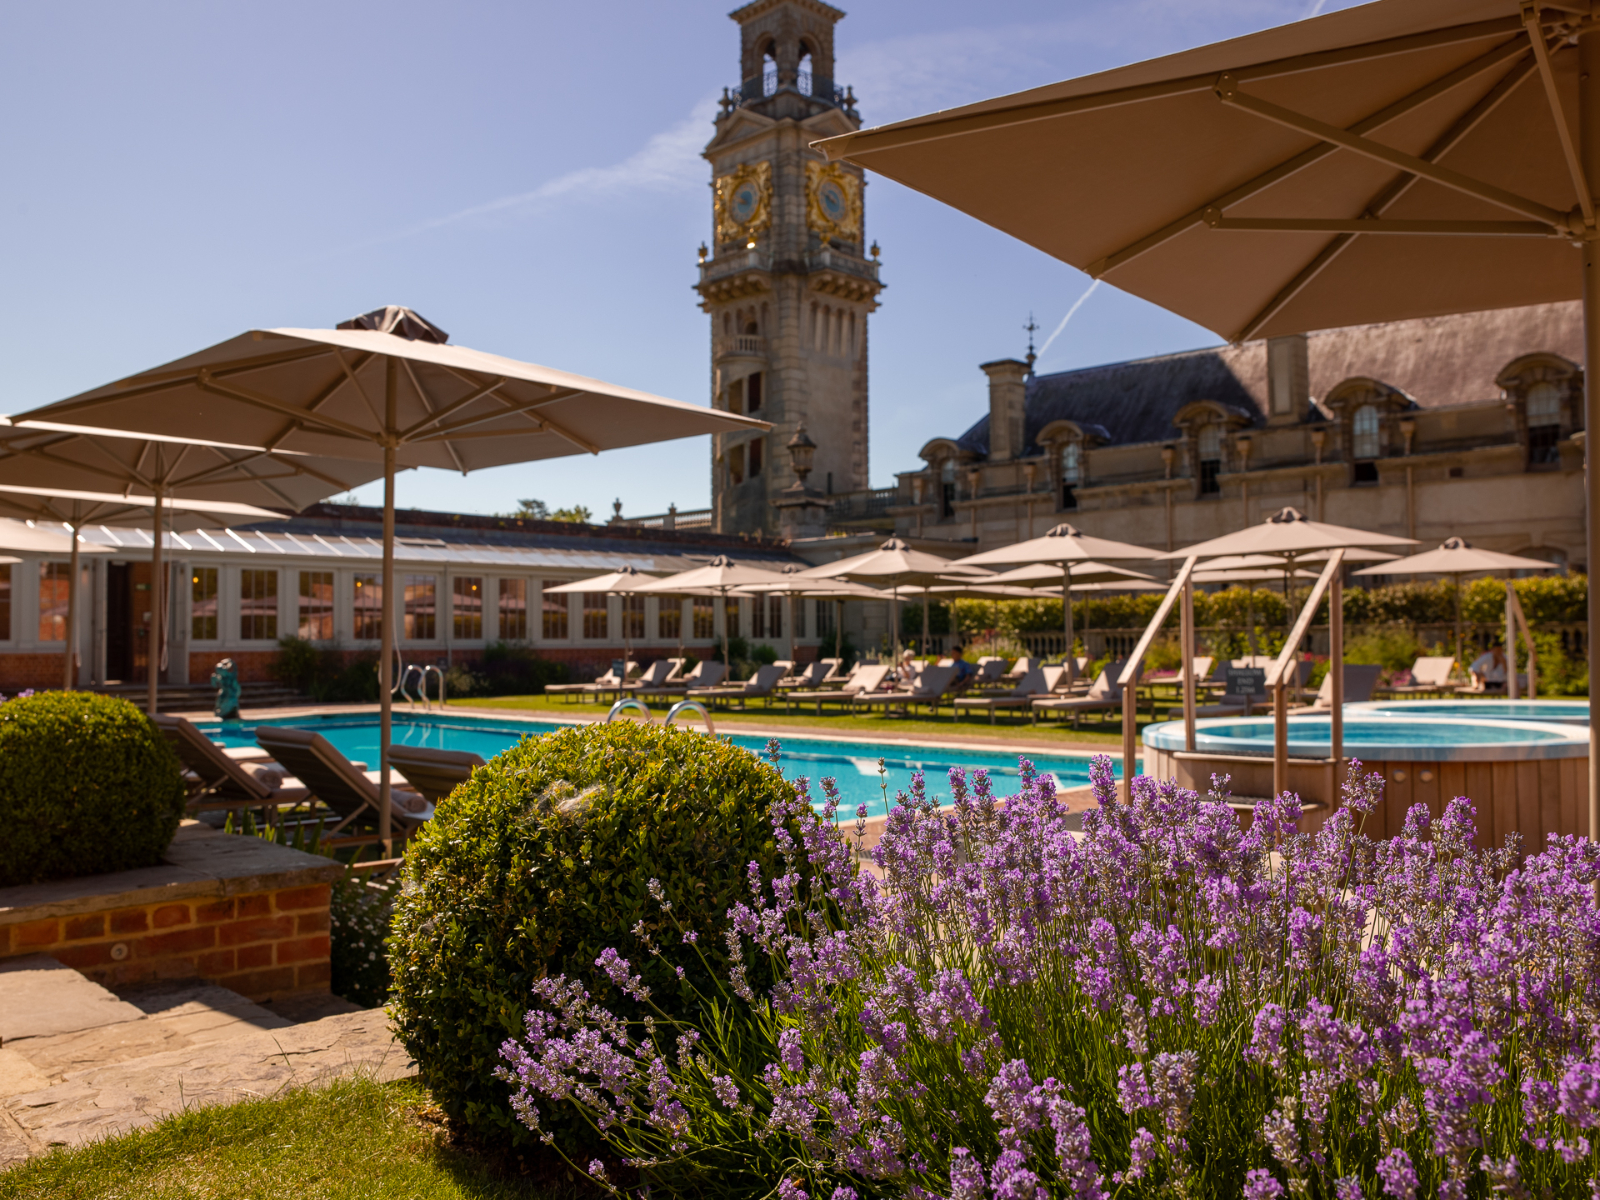 Outdoor pool and terrace at Cliveden House in Berkshire UK